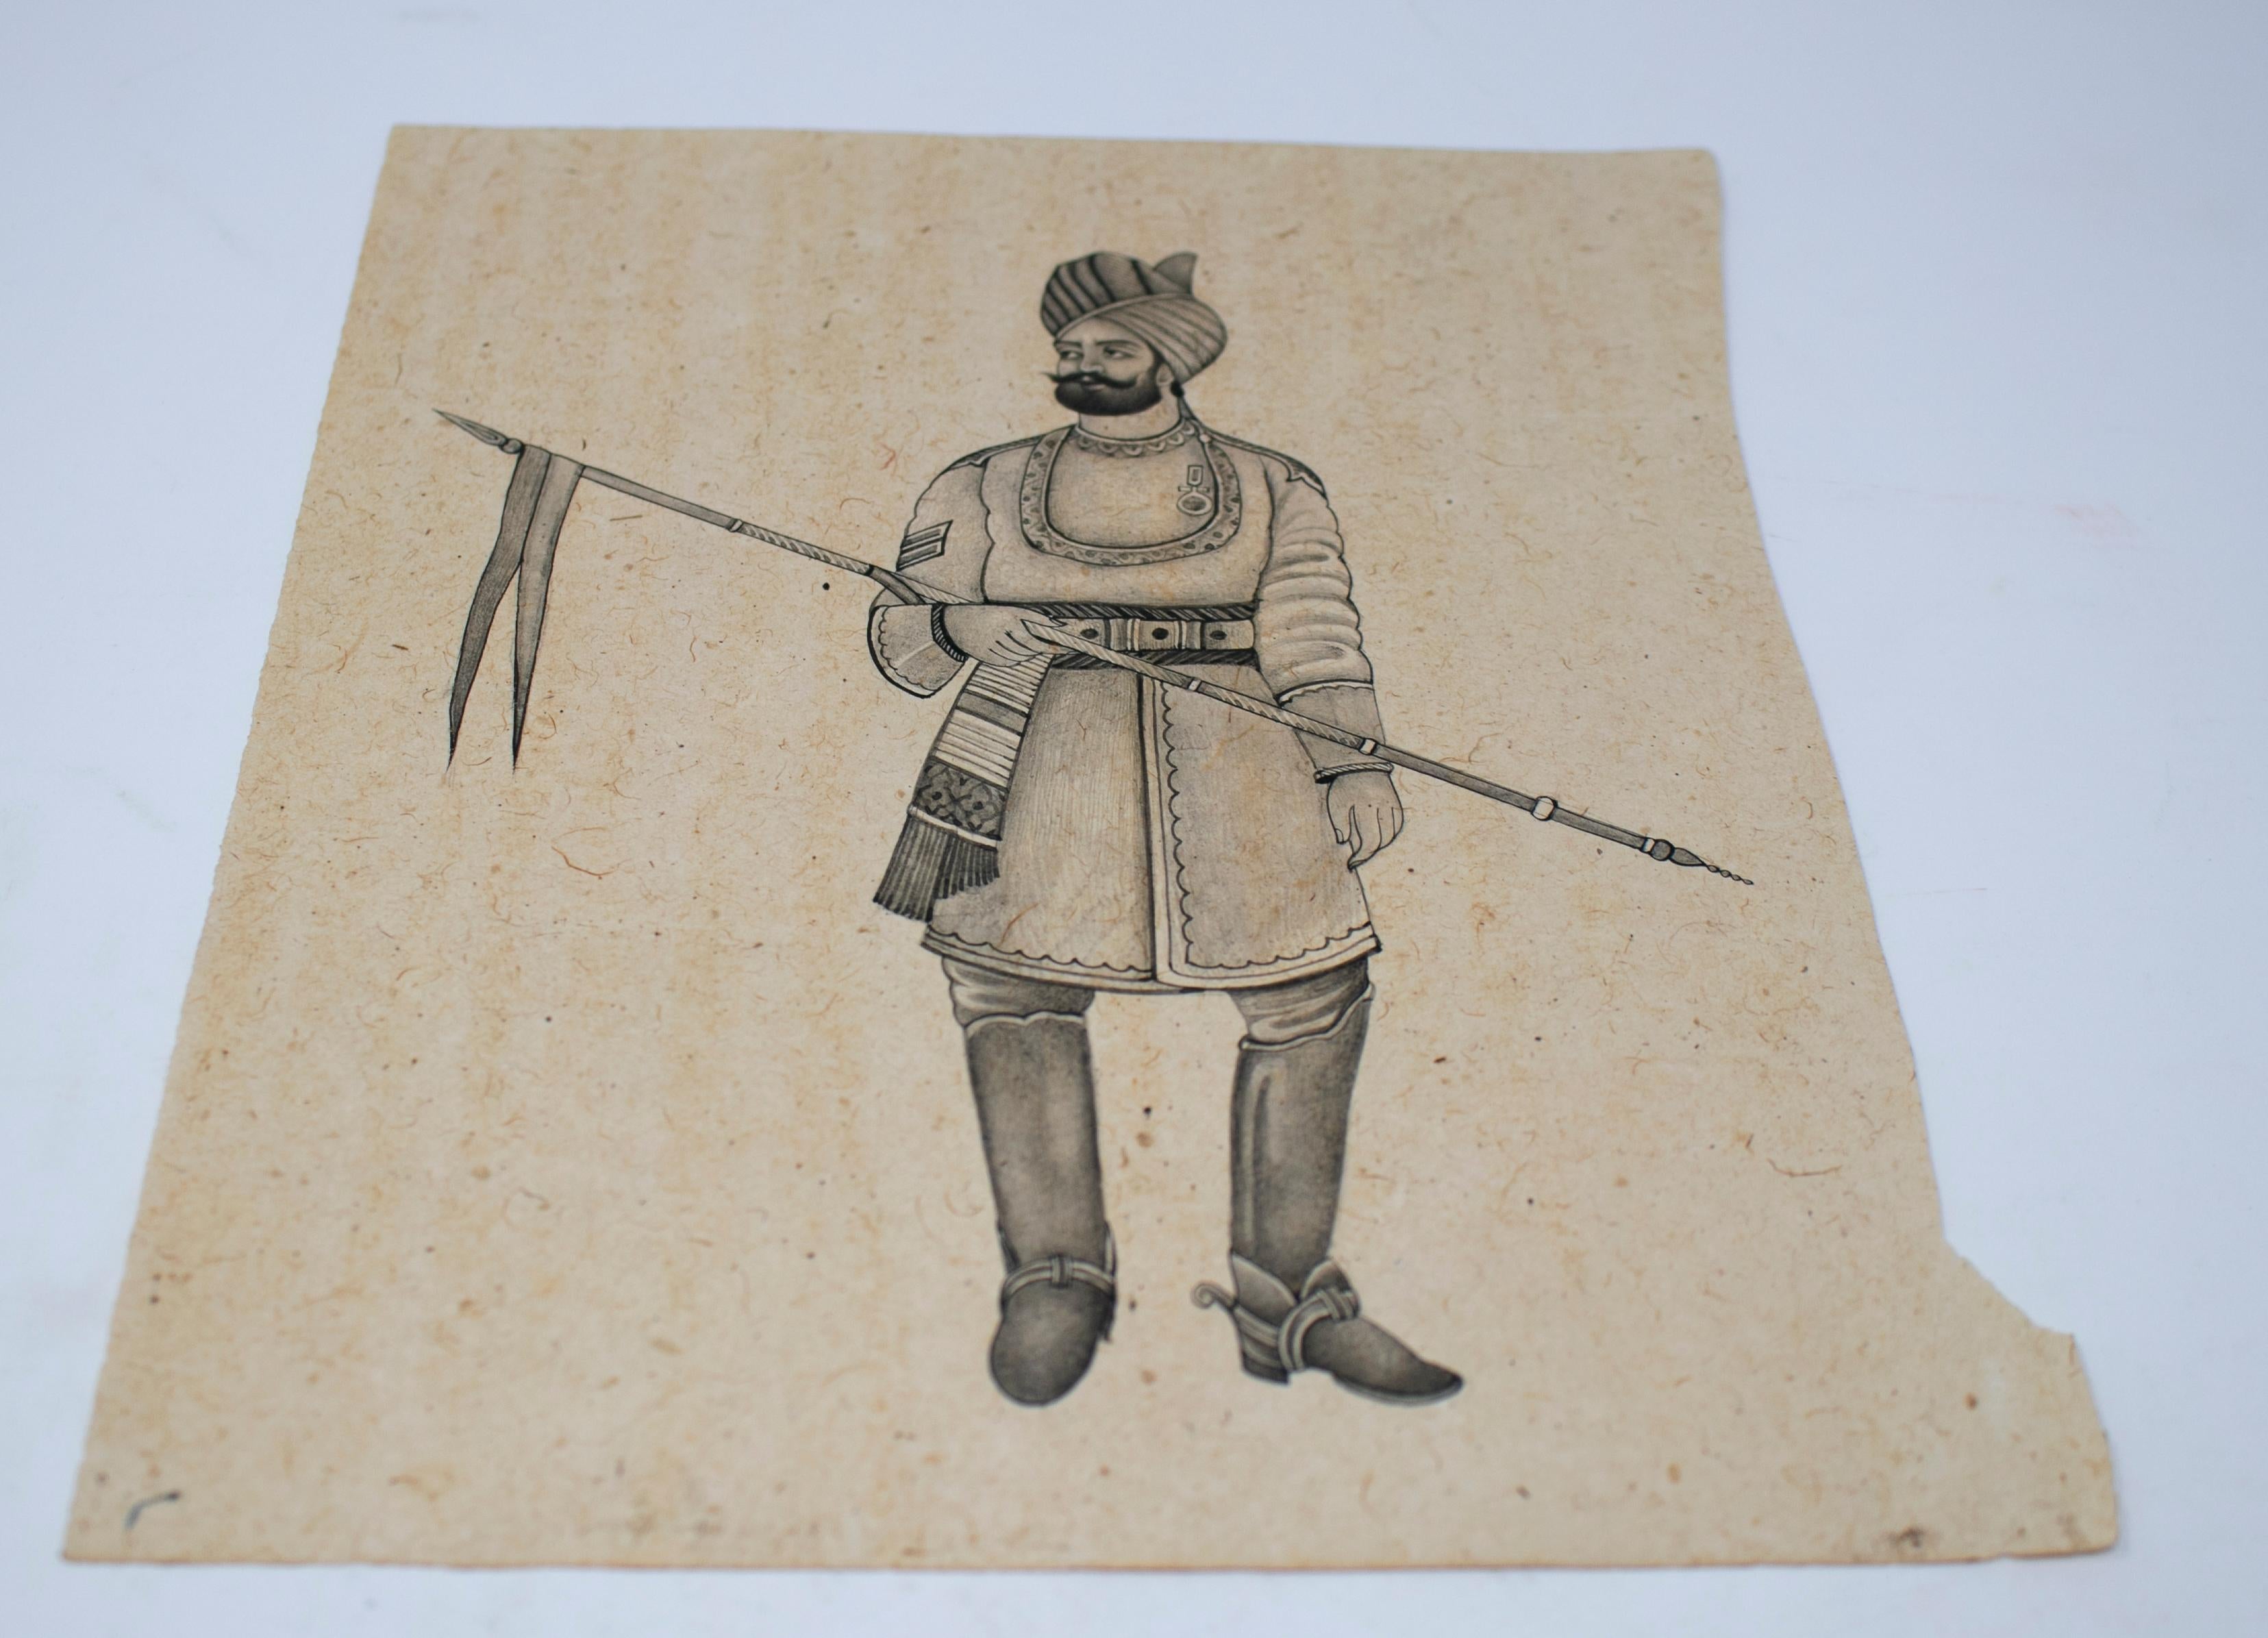 1970s Indian paper drawing of a Hindu man with a spear, part of a private collection.